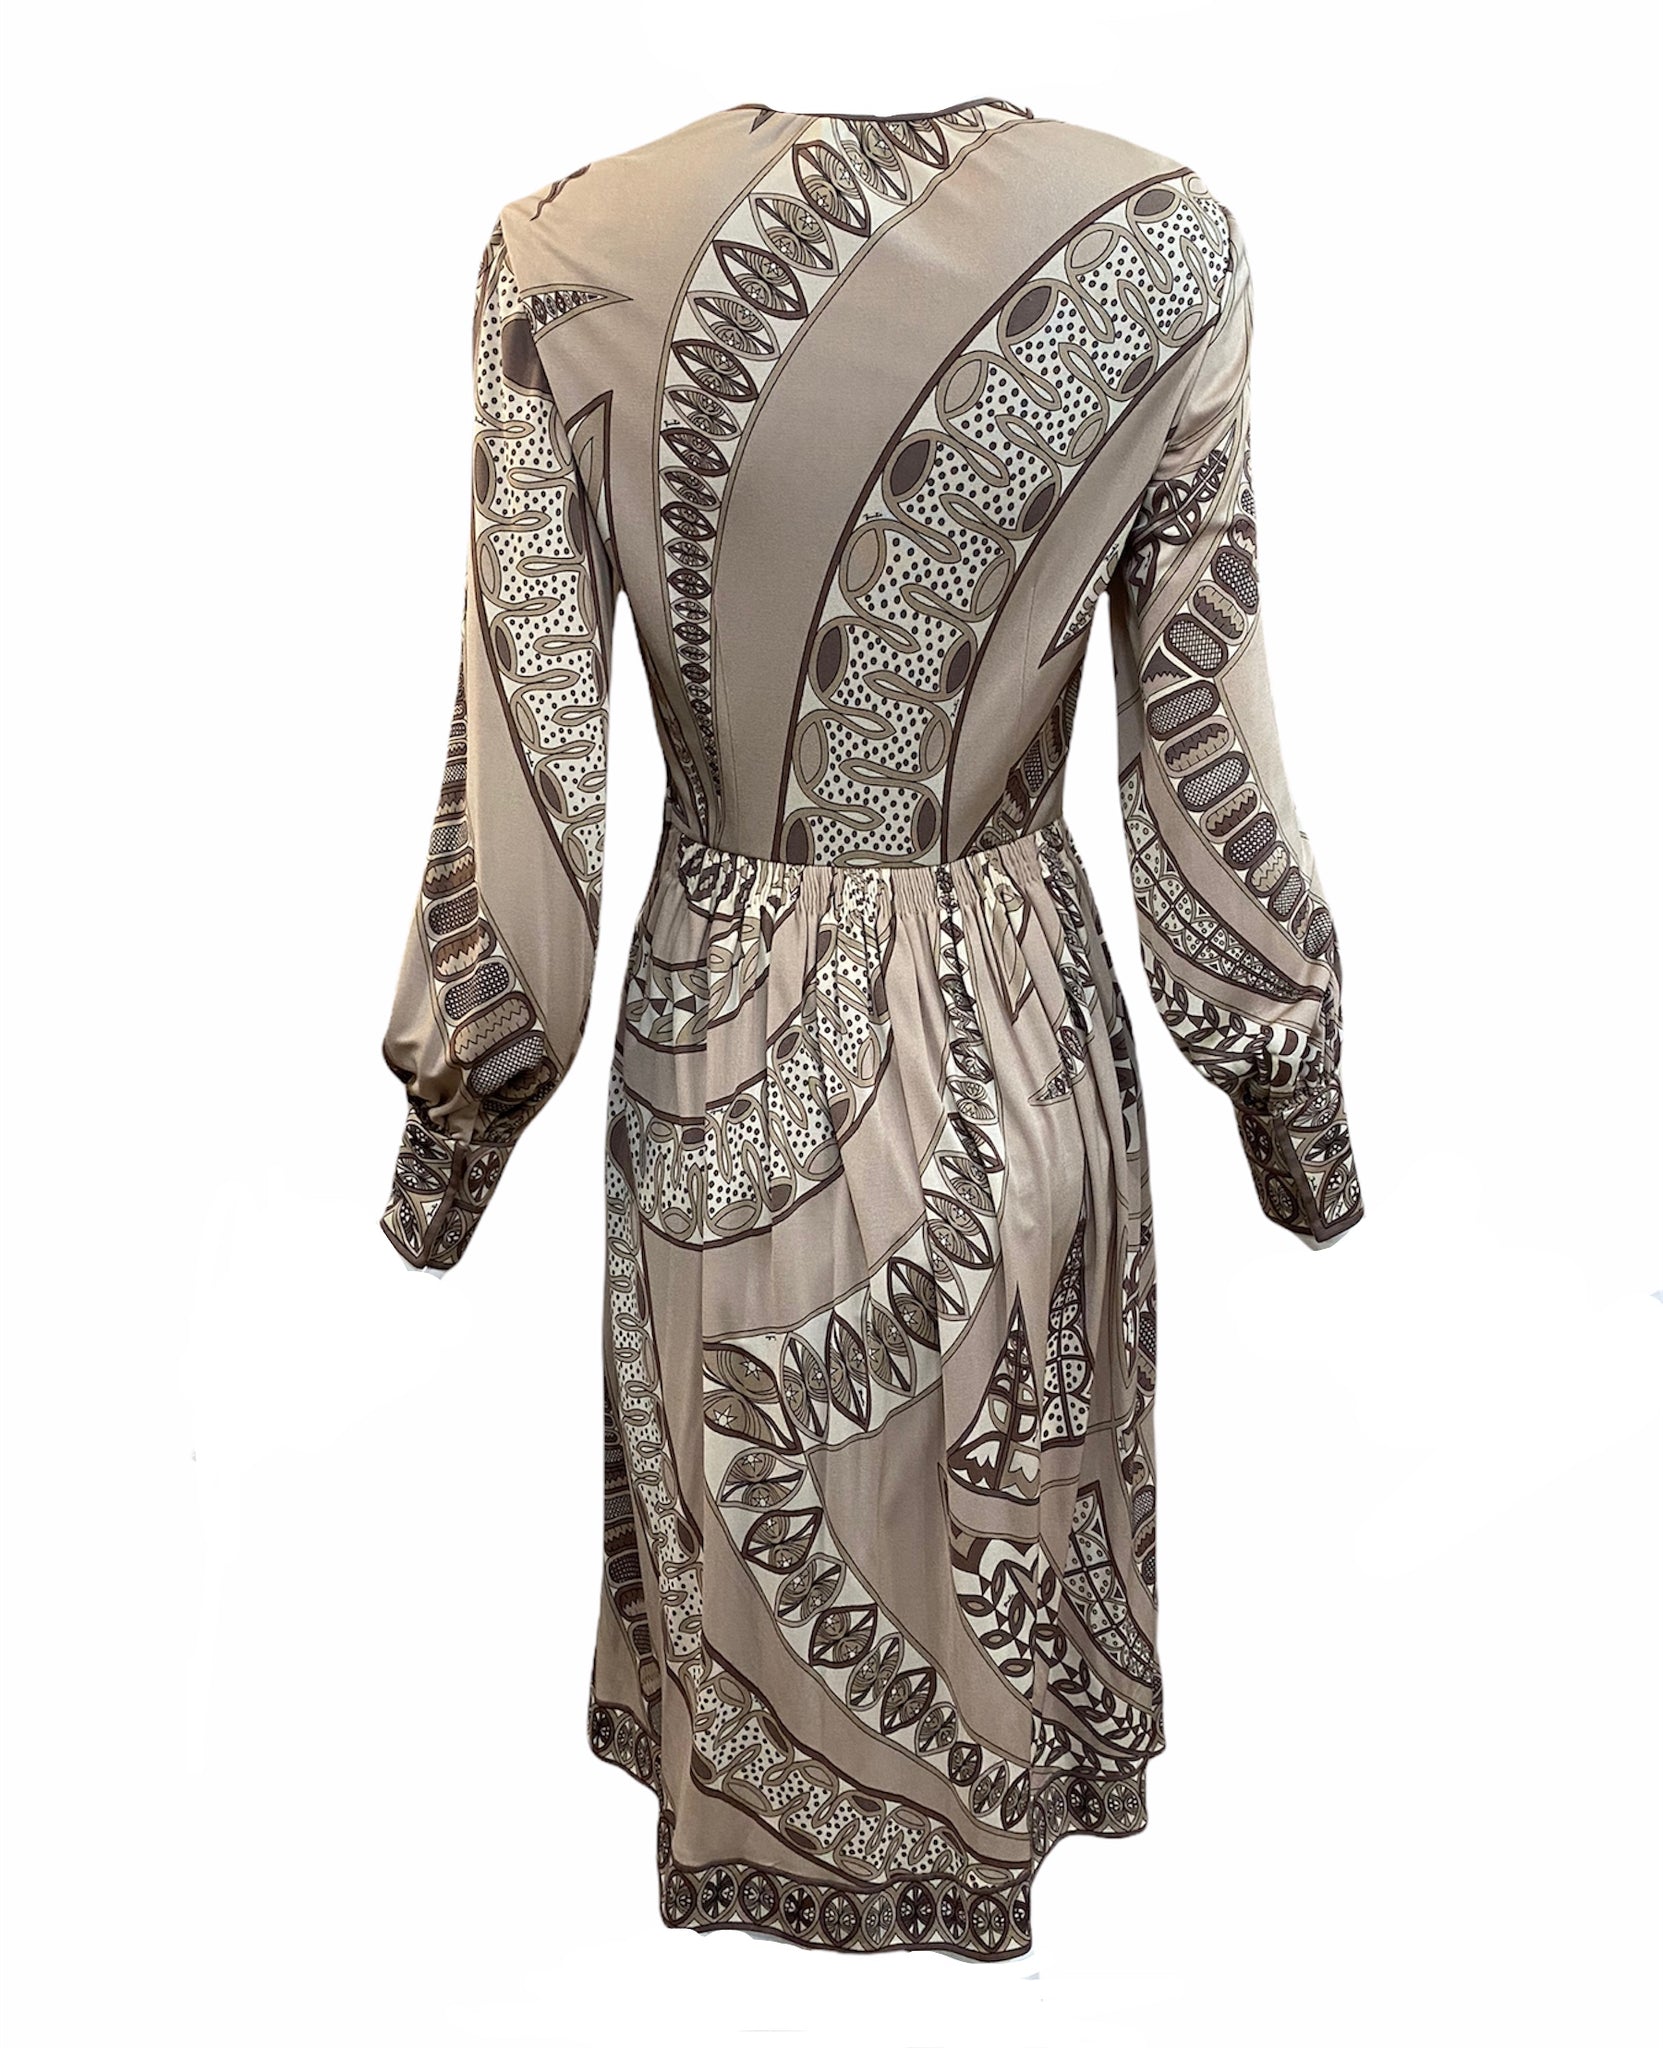 Pucci 70s Earth Tones Jersey Dress with Iconic Print BACK 2 of 5